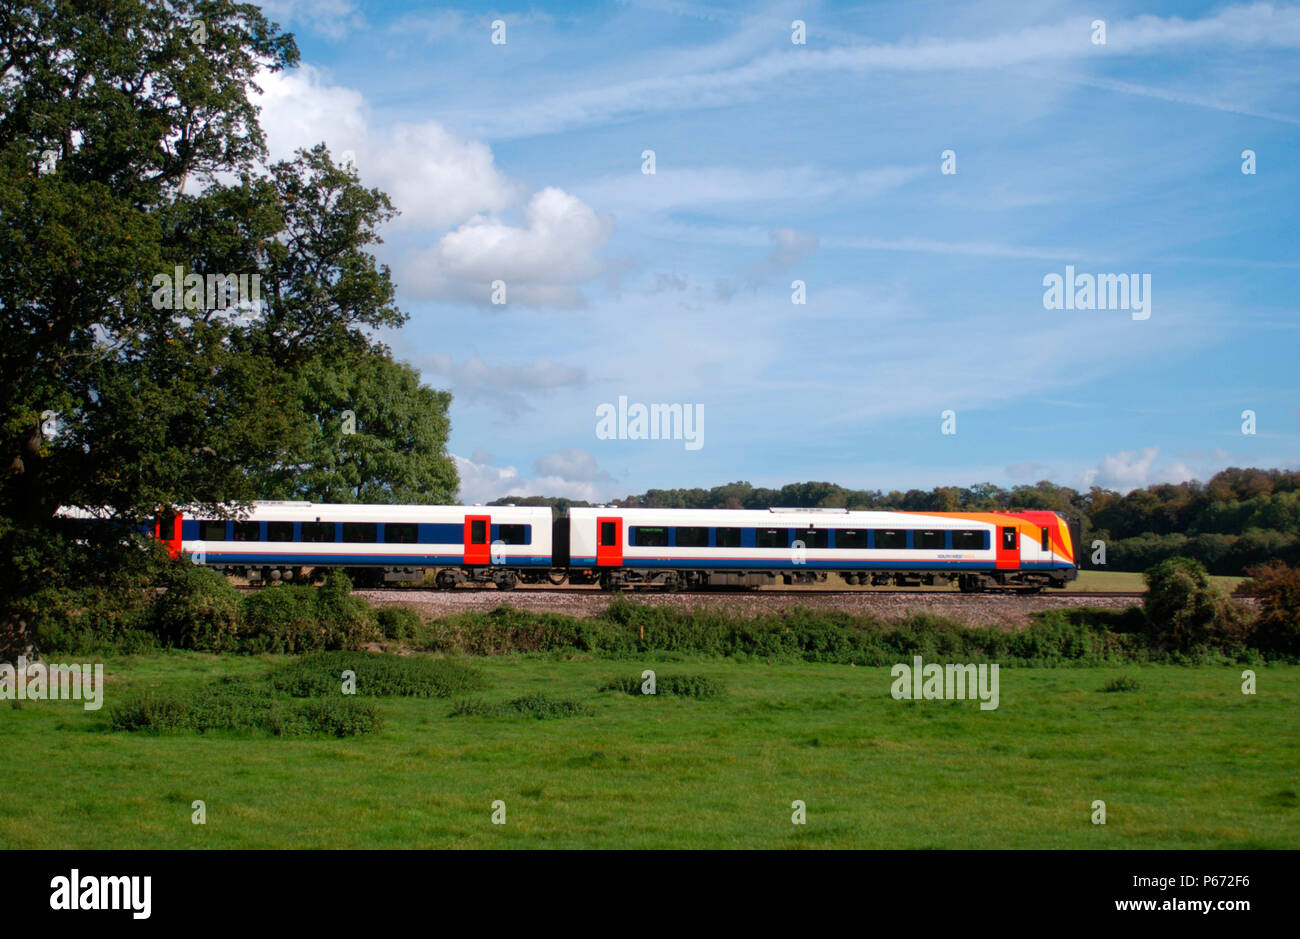 A South West Trains train in action. 2004. Stock Photo